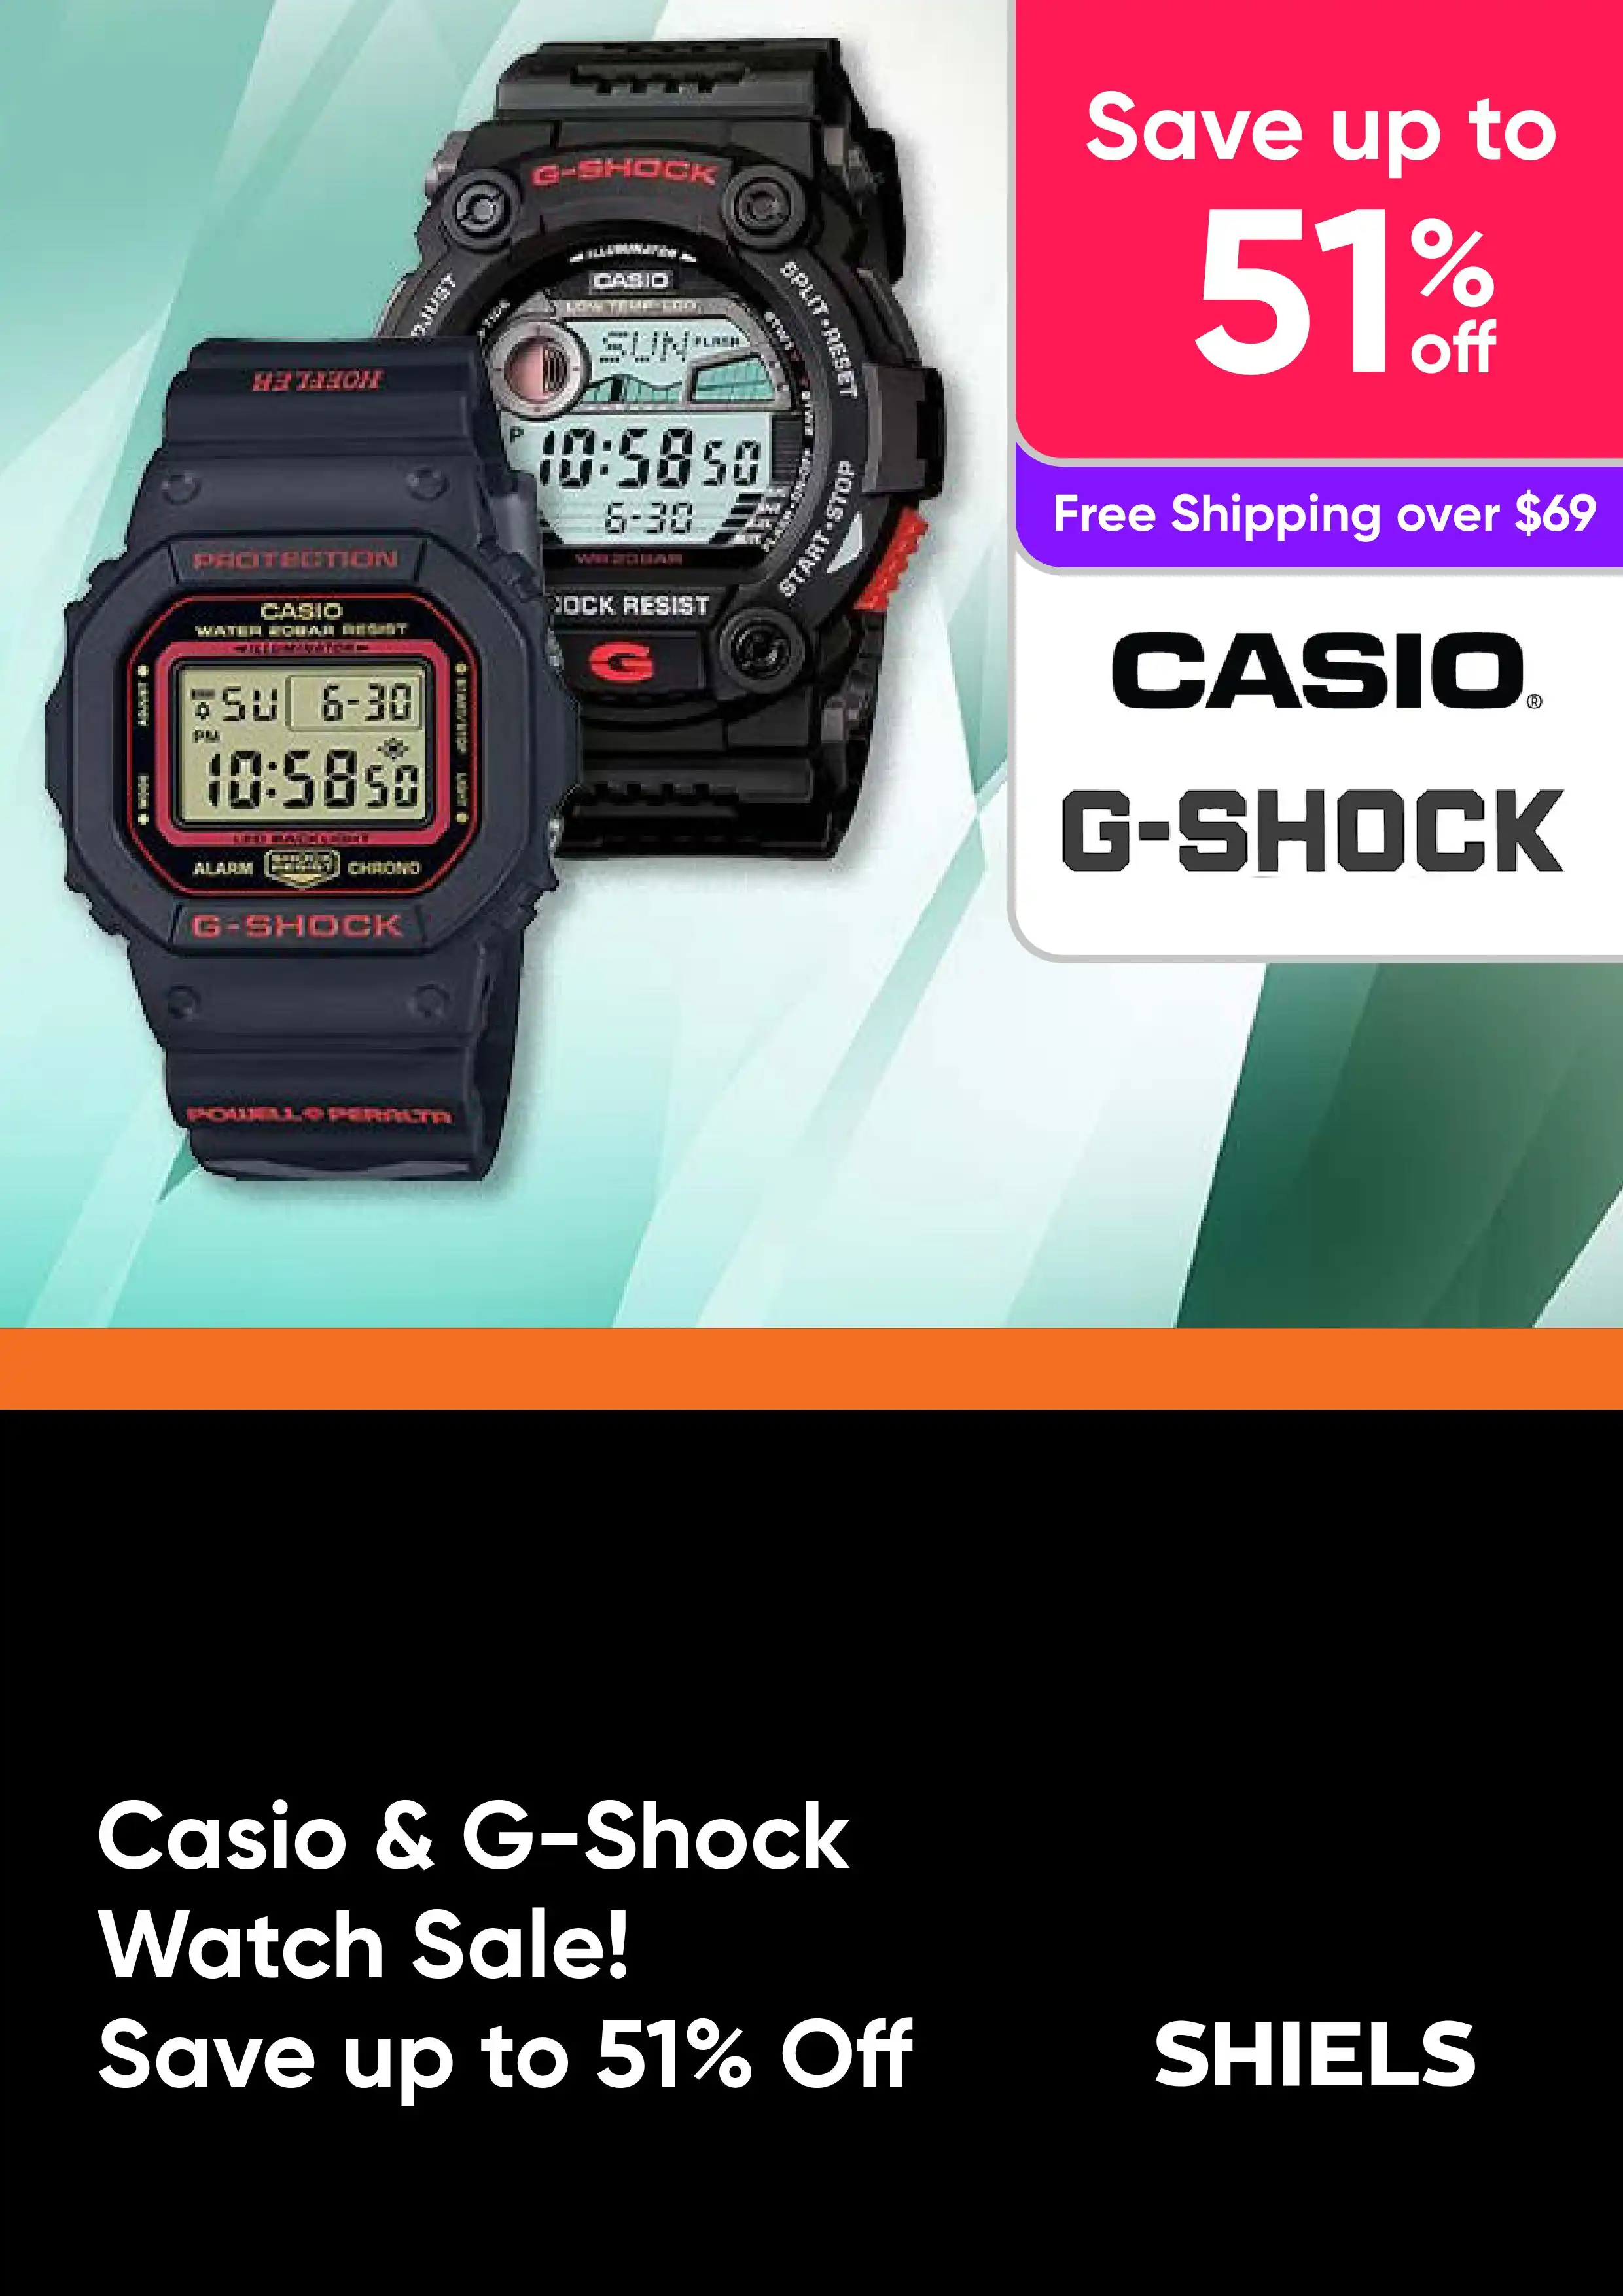 Casio & G-Shock Watch Sale! Save up to 51% Off